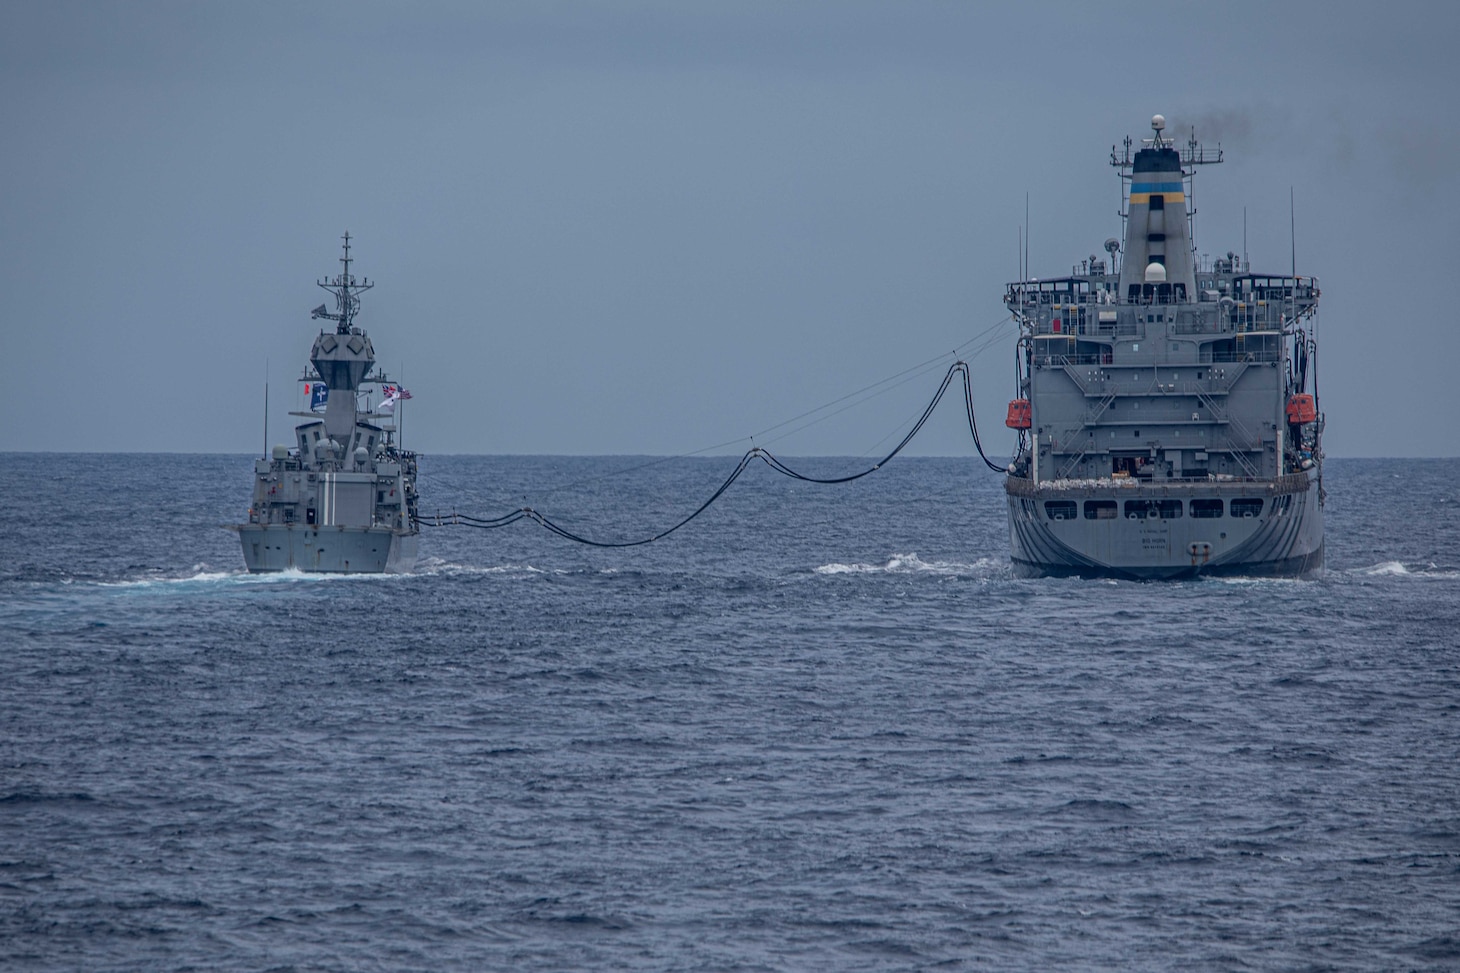 The Royal Australian Navy Anzac-class frigate HMAS Ballarat (FFH 155) steams ahead of Arleigh Burke-class guided-missile destroyer USS Curtis Wilbur (DDG 54) during a replenishment-at-sea with the Military Sealift Command Henry J. Kaiser Class fleet replenishment oiler USNS Big Horn (T-AO 198). Curtis Wilbur is assigned to Commander, Task Force 71/Destroyer Squadron (DESRON) 15, the Navy’s largest forward-deployed DESRON and U.S. 7th Fleet’s principal surface force.